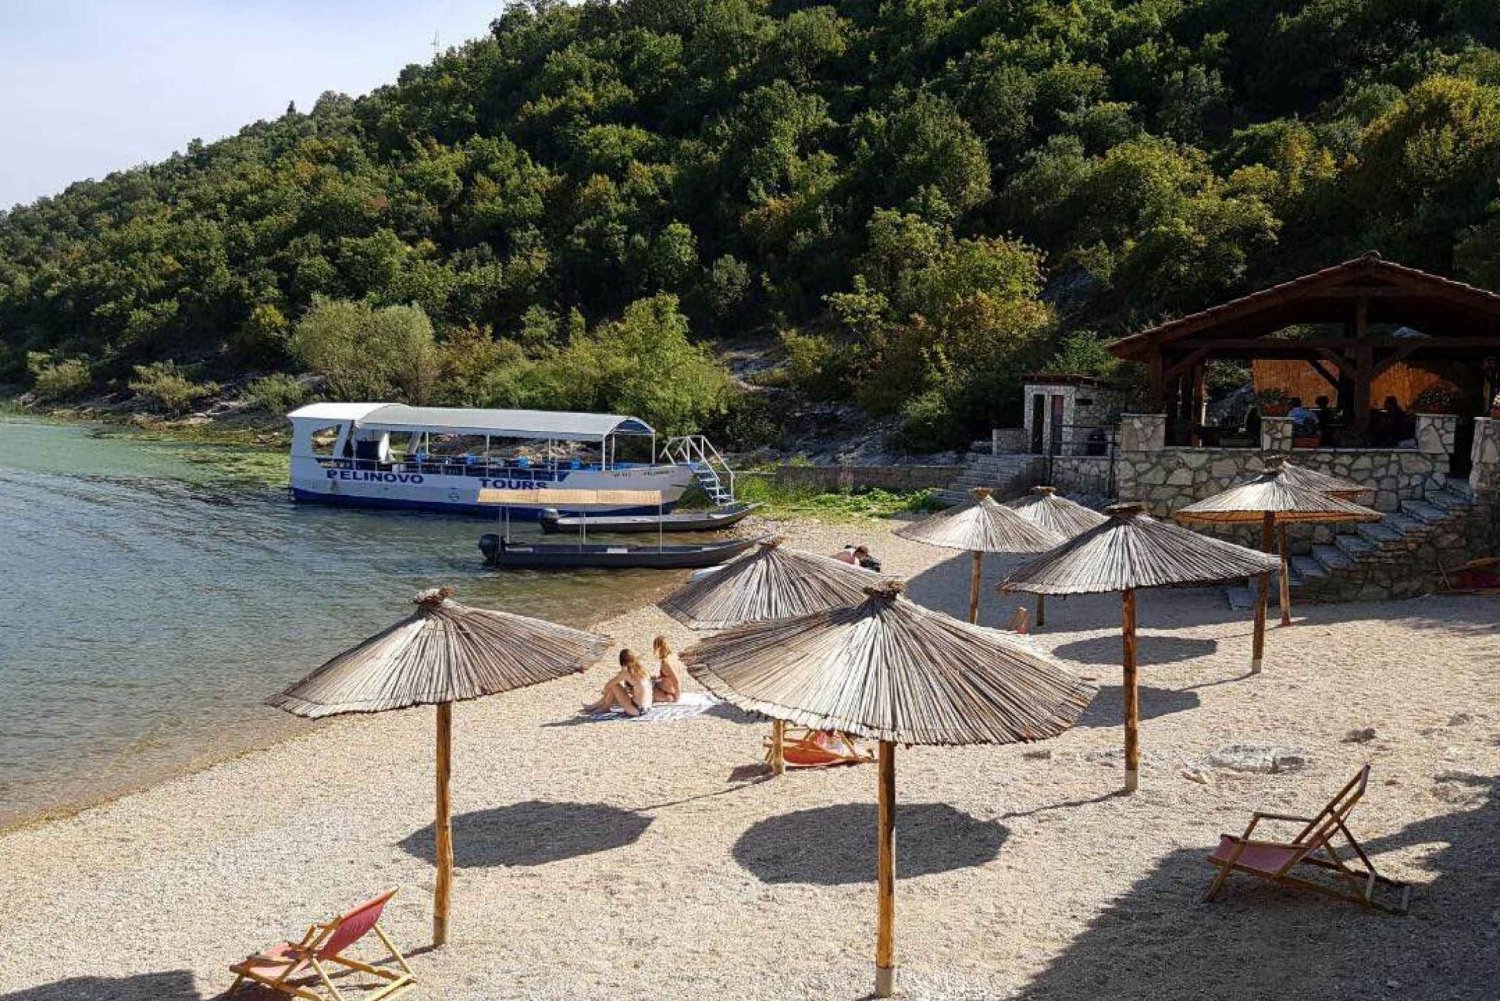 From Tivat: Skadar Lake Land and Boat Tour